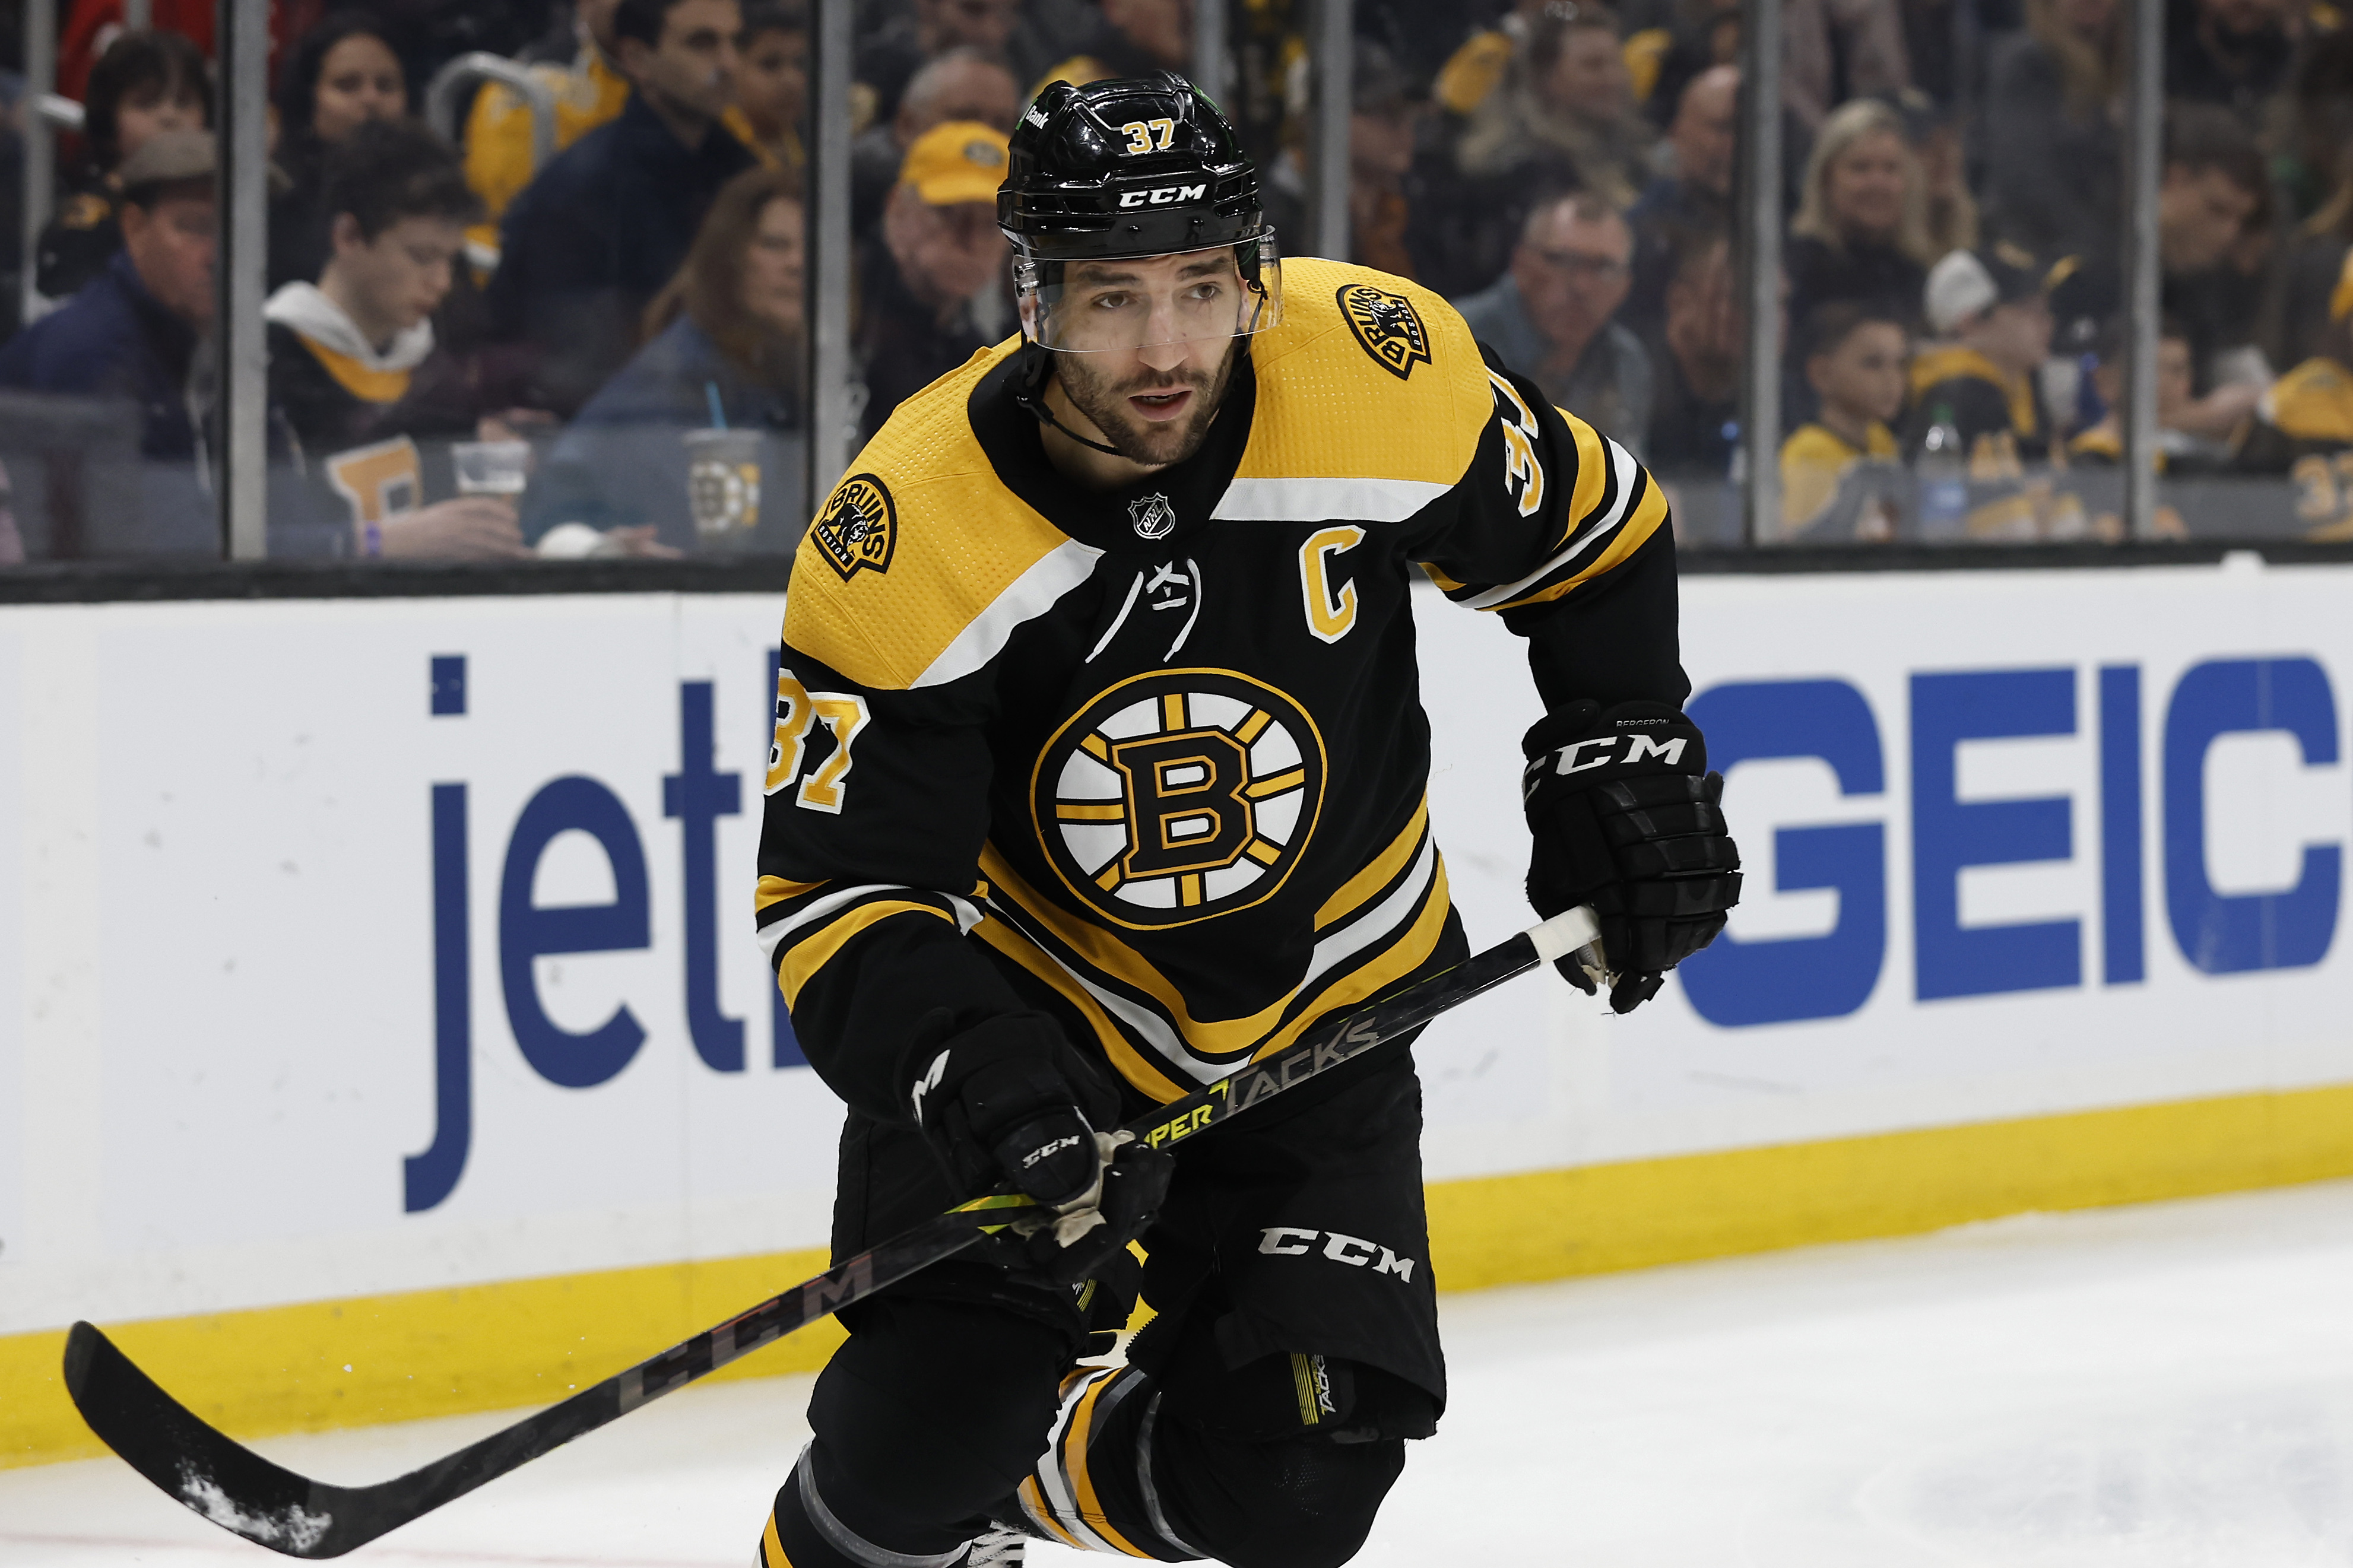 Charlie McAvoy ready to step up as the next great Boston Bruins